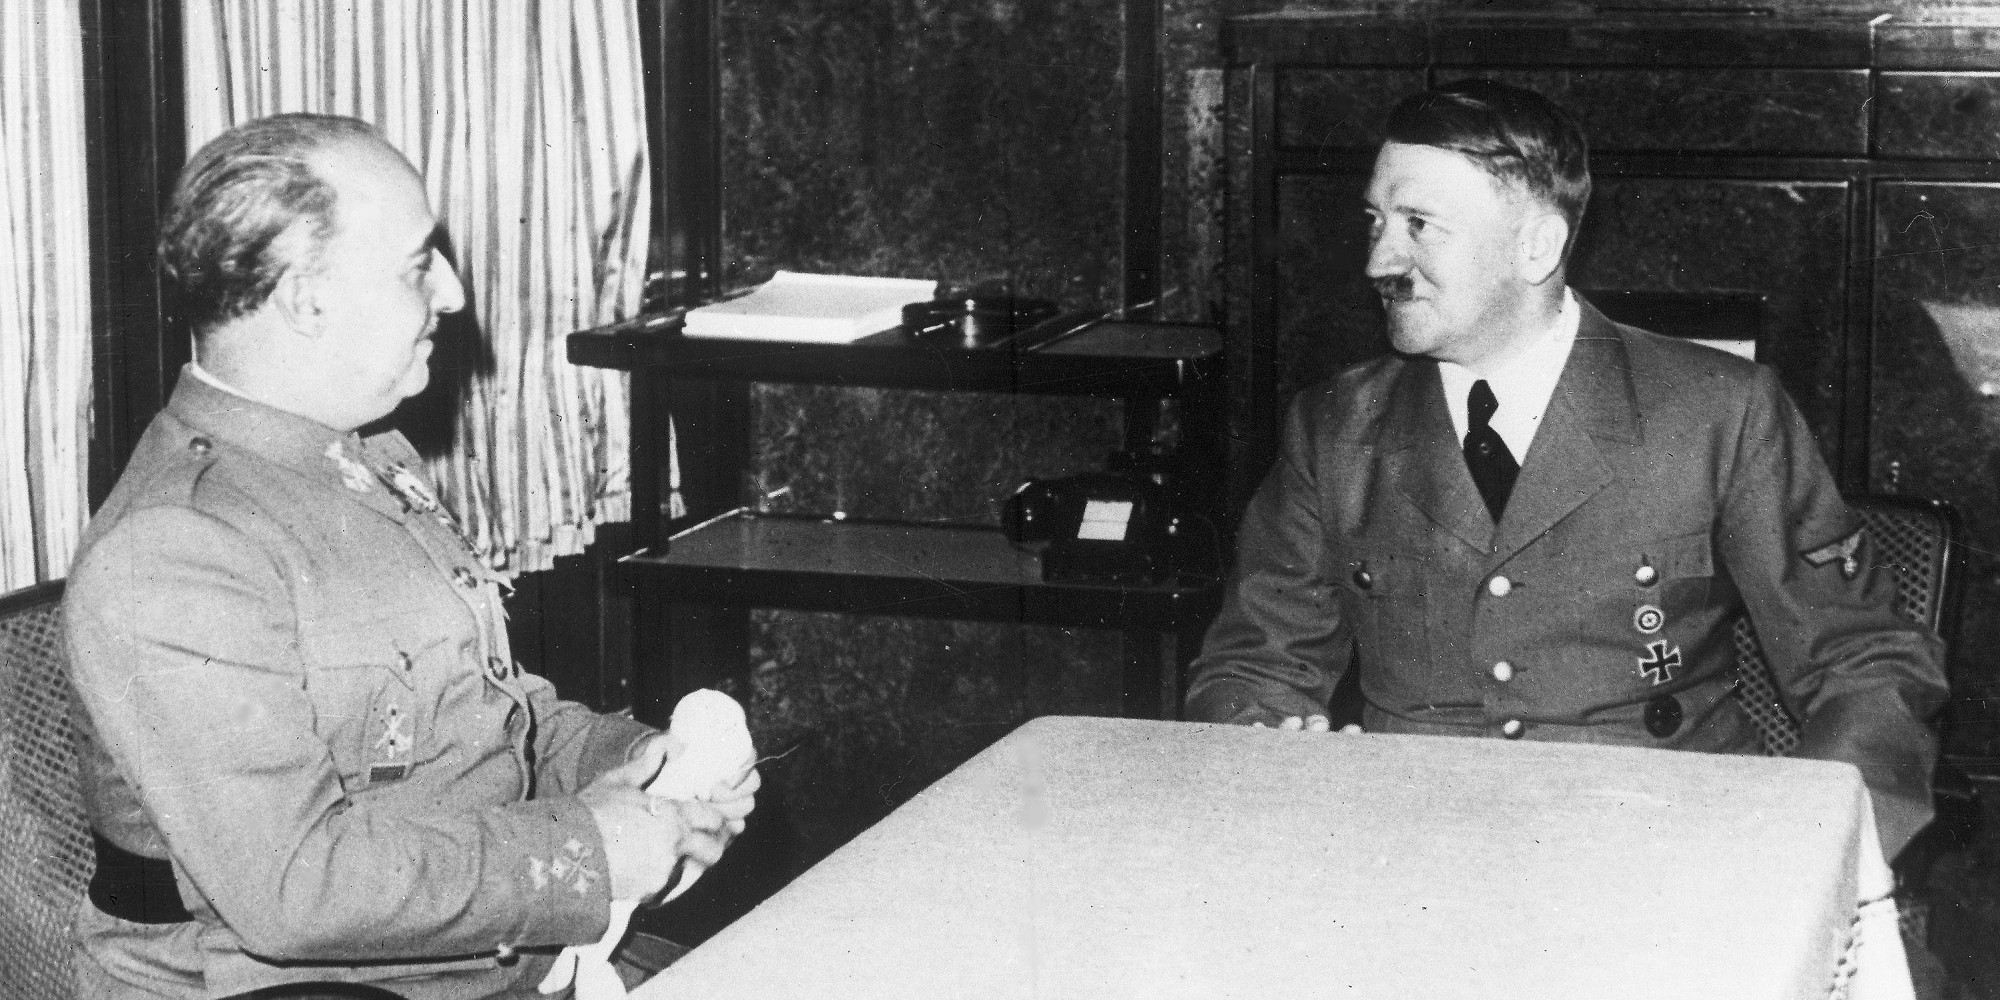 German Chancellor Adolf Hitler, right, talks with Spain's Generalissimo Franco, in Hendaye, France, Oct. 23, 1940, in Hitlers railway carriage during his trip to France, Spain and Italy. (AP Photo)